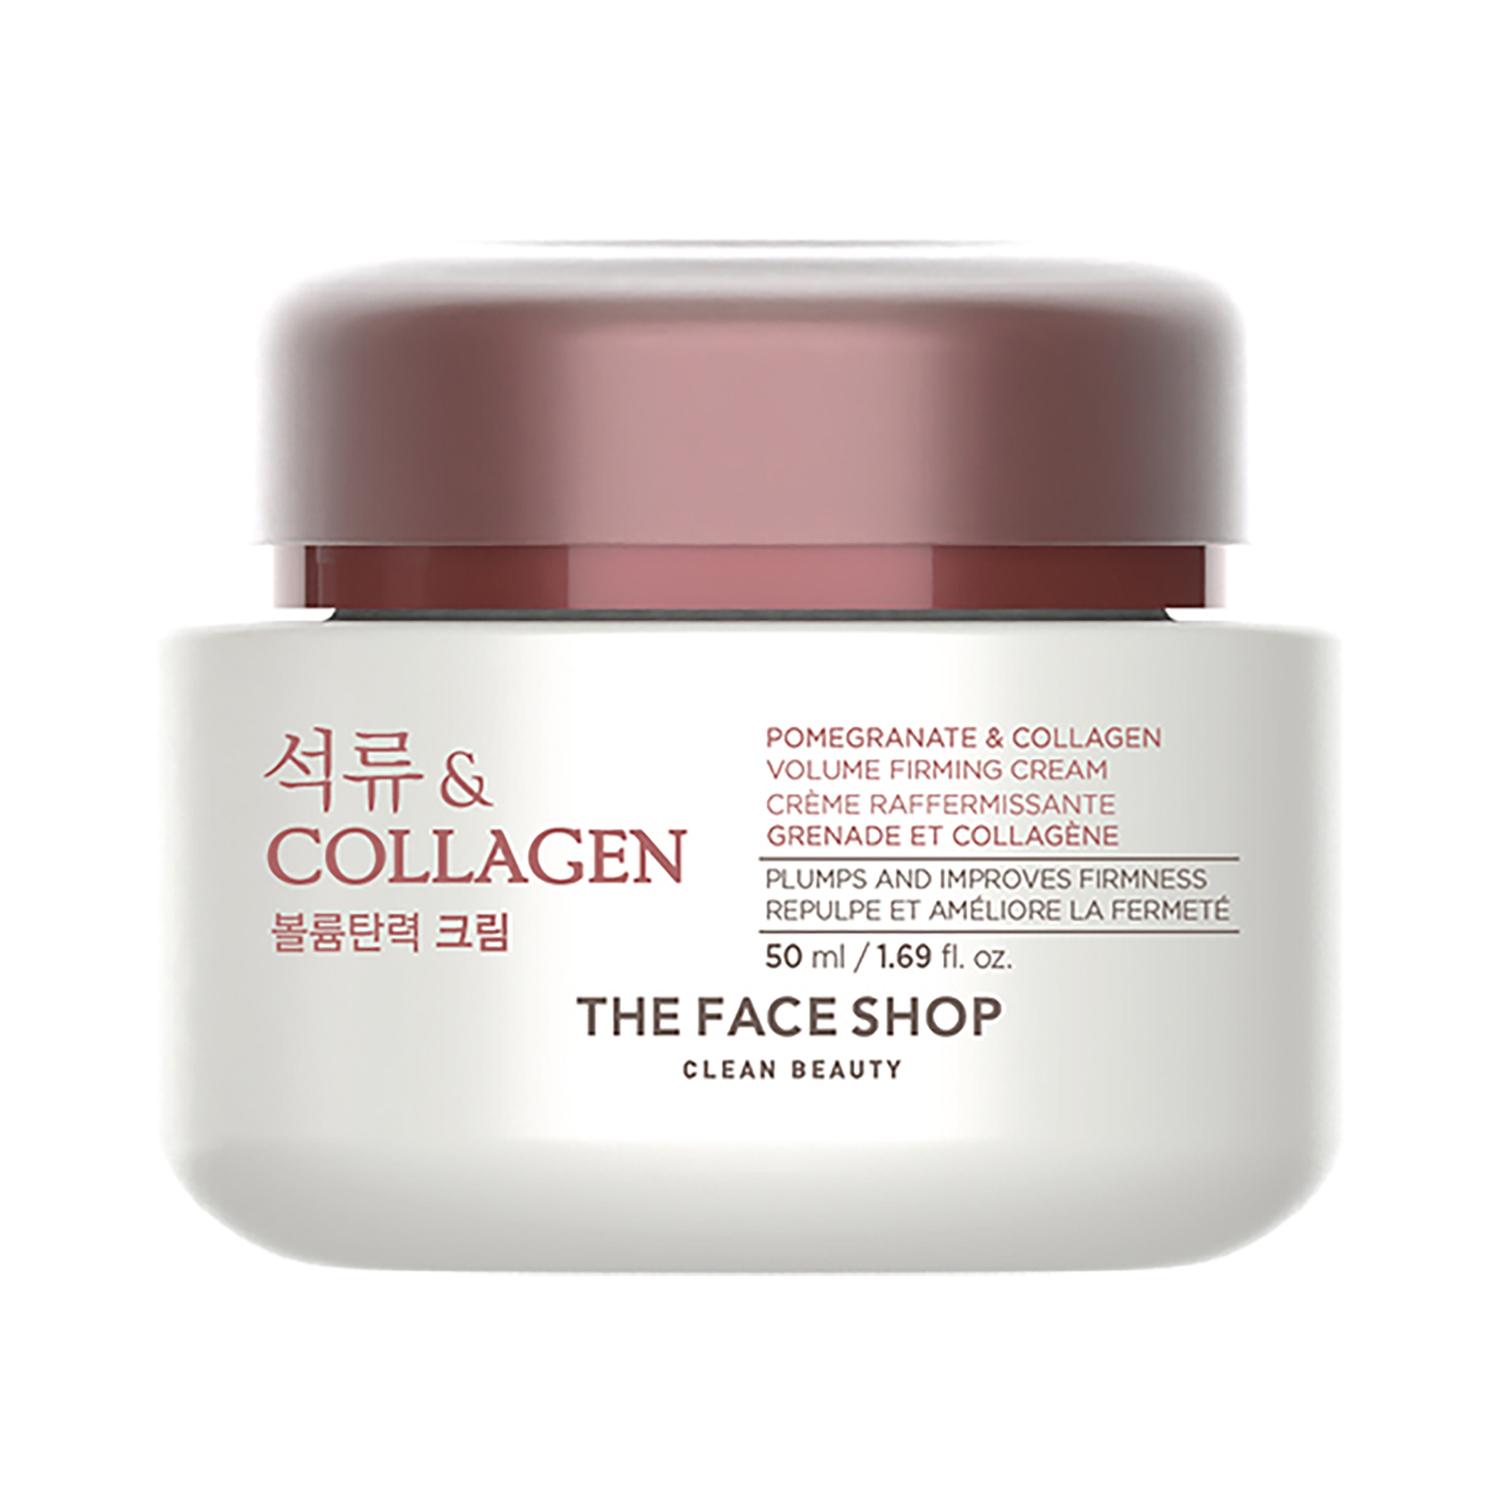 The Face Shop | The Face Shop Pomegranate and Collagen Volume Lifting Cream (50 ml)